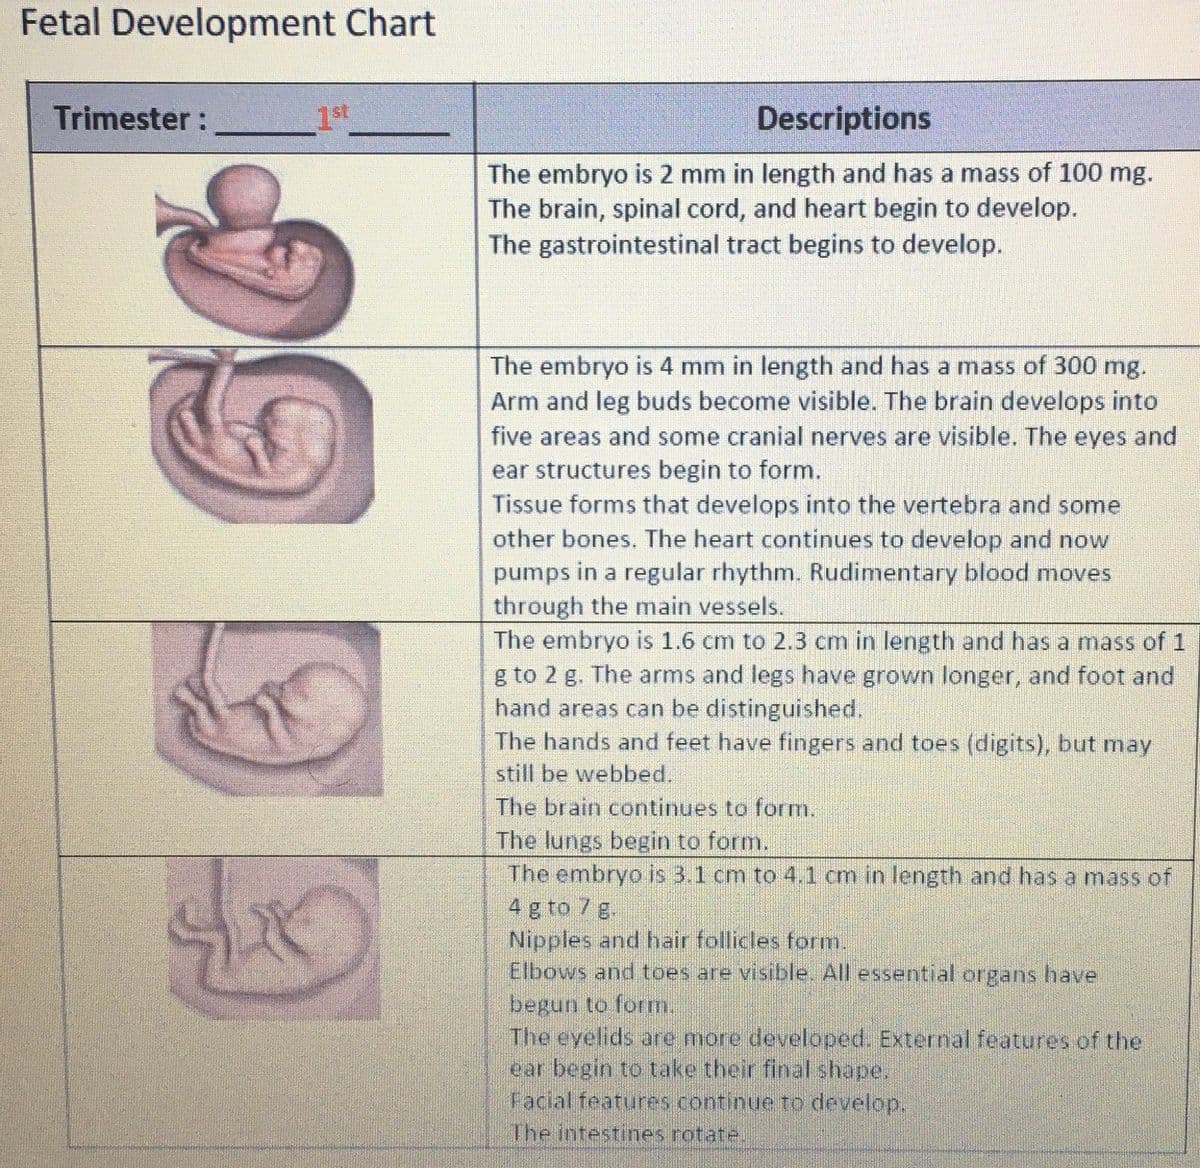 Fetal Development Chart
Trimester:
1st
Descriptions
The embryo is 2 mm in length and has a mass of 100 mg.
The brain, spinal cord, and heart begin to develop.
The gastrointestinal tract begins to develop.
The embryo is 4 mm in length and has a mass of 300 mg.
Arm and leg buds become visible. The brain develops into
five areas and some cranial nerves are visible. The eyes and
ear structures begin to form.
Tissue forms that develops into the vertebra and some
other bones. The heart continues to develop and now
pumps in a regular rhythm. Rudimentary blood moves
through the main vessels.
The embryo is 1.6 cm to 2.3 cm in length and has a mass of 1
g to 2 g. The arms and legs have grown longer, and foot and
hand areas can be distinguished.
The hands and feet have fingers and toes (digits), but may
still be webbed.
The brain continues to form.
The lungs begin to form.
The embryo is 3.1 cm to 4.1 cm in length and has a mass of
4 g to 7 g.
Nipples and hair follicles form.
Elbows and toes are visible. All essential organs have
begun to form.
The eyelids are more developed. External features of the
ear begin to take their final shape.
Facial features continue to develop.
The intestines rotate.